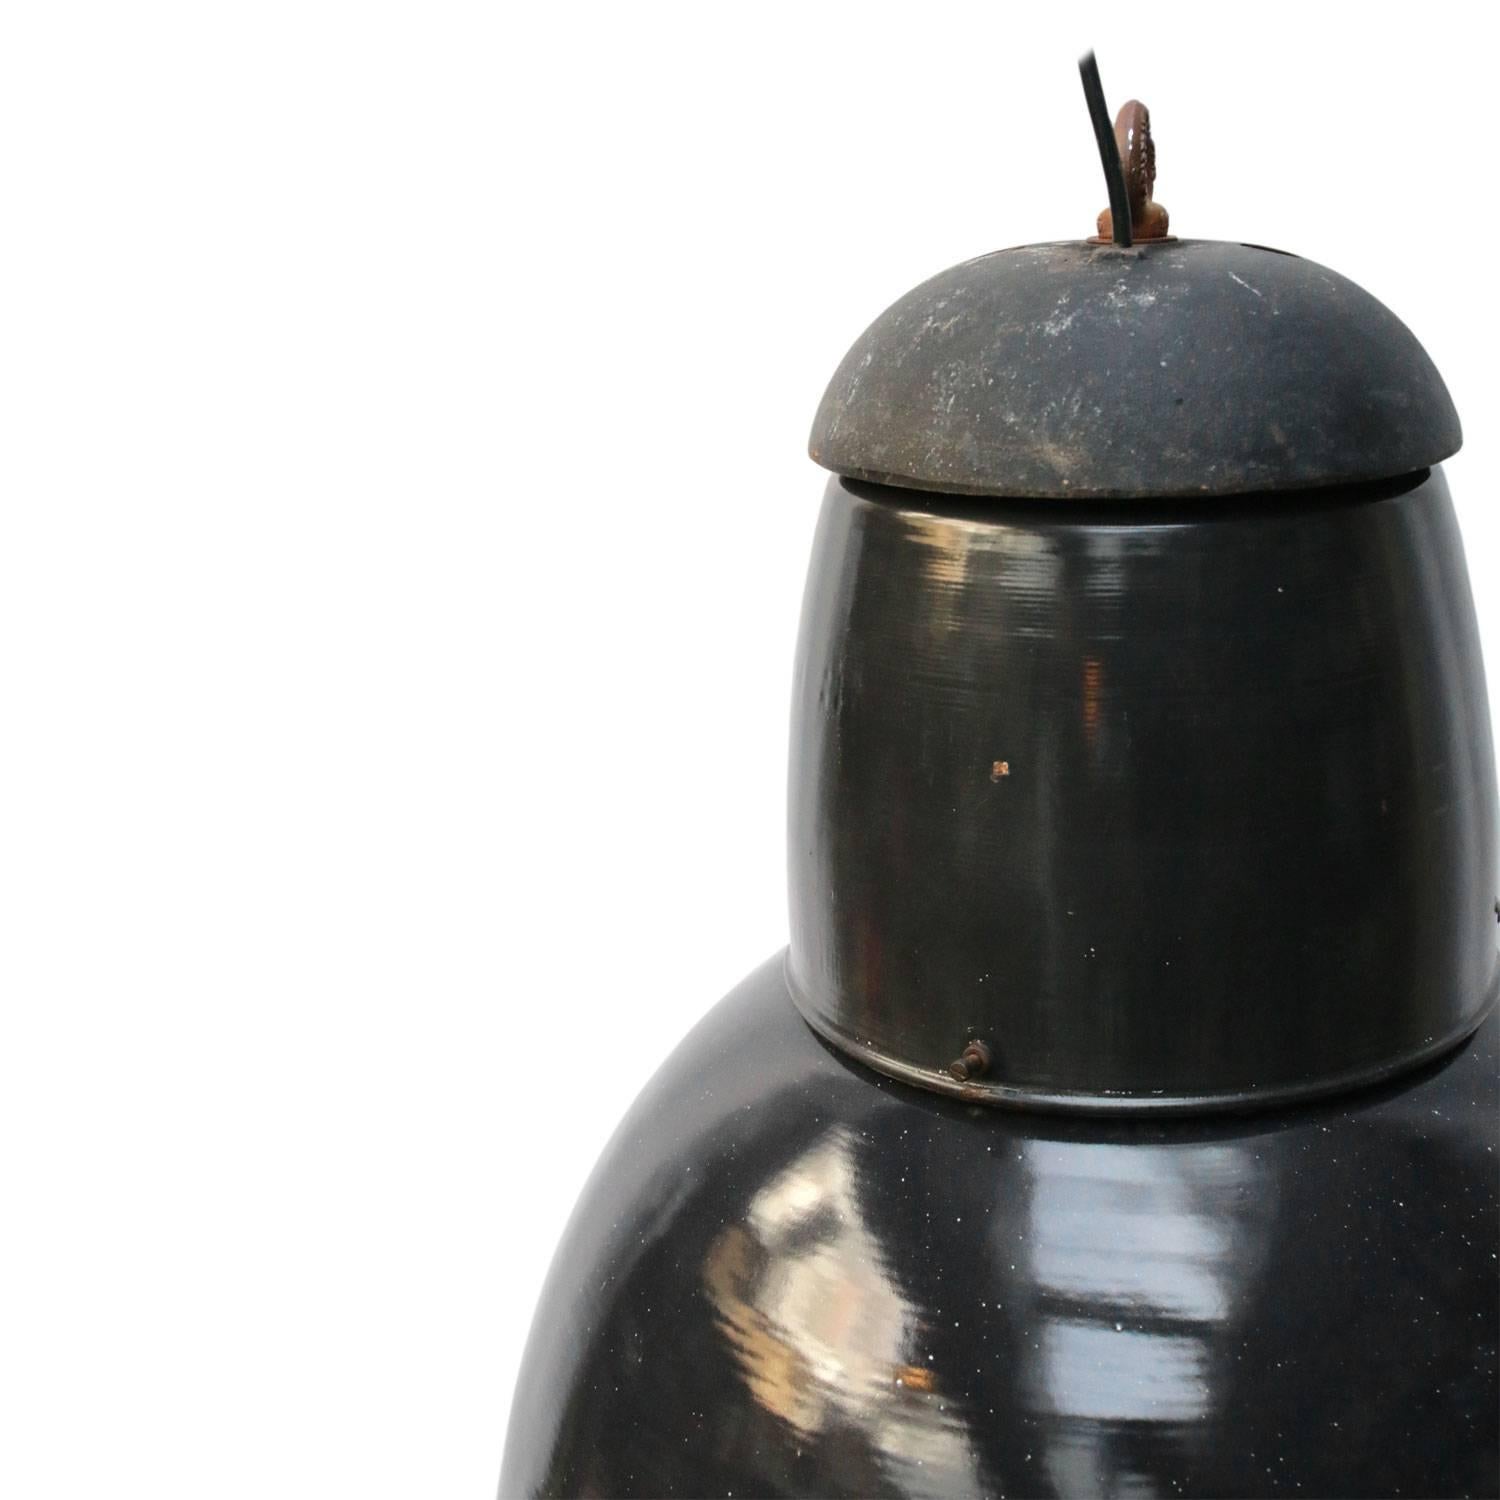 Black / very dark blue enamel Industrial pendant.
Nicely aged coloring in patina. White interior.

Measures: Weight: 7.5 kg / 16.5 lb.

Priced per individual item. All lamps have been made suitable by international standards for incandescent light